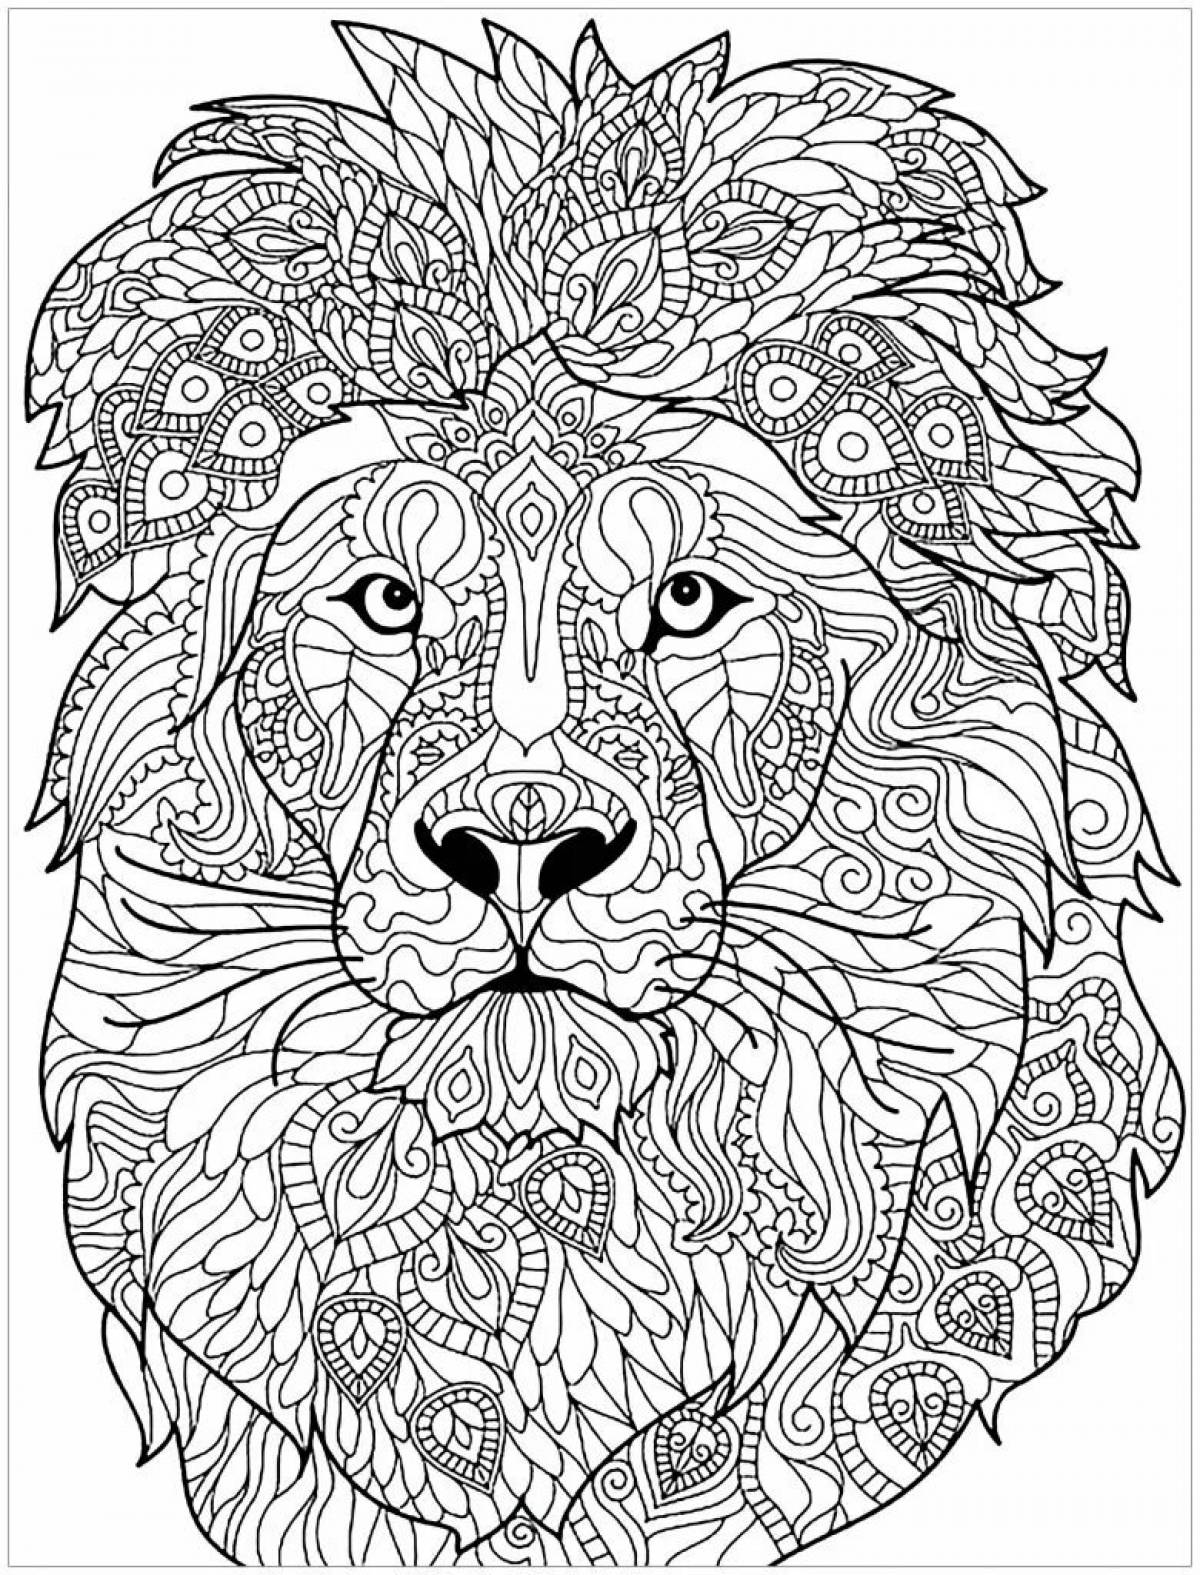 Dazzling animal coloring pages